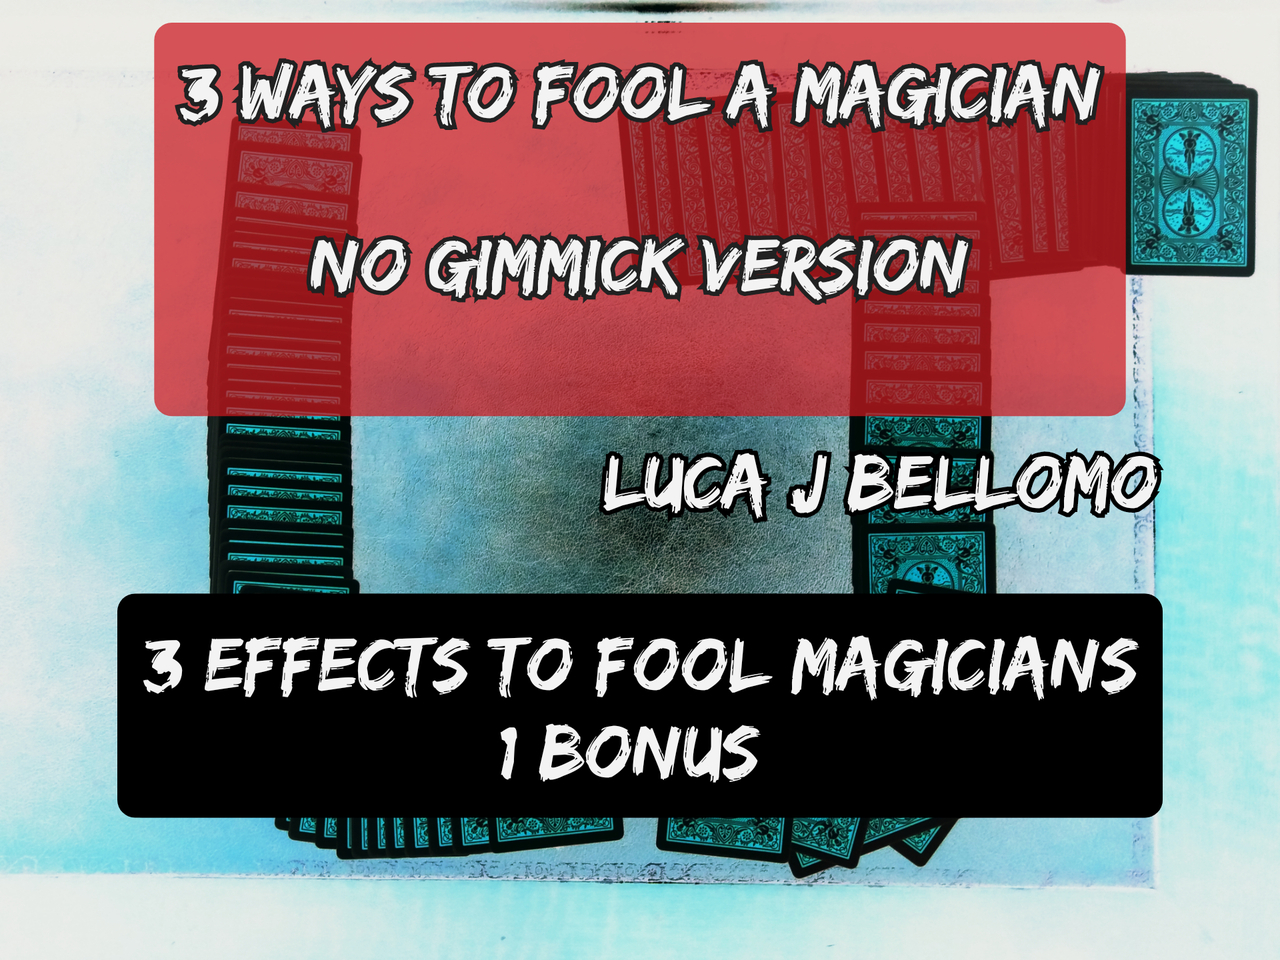 3 Ways to Fool a Magician by Luca J Bellomo (MP4 Video Download)